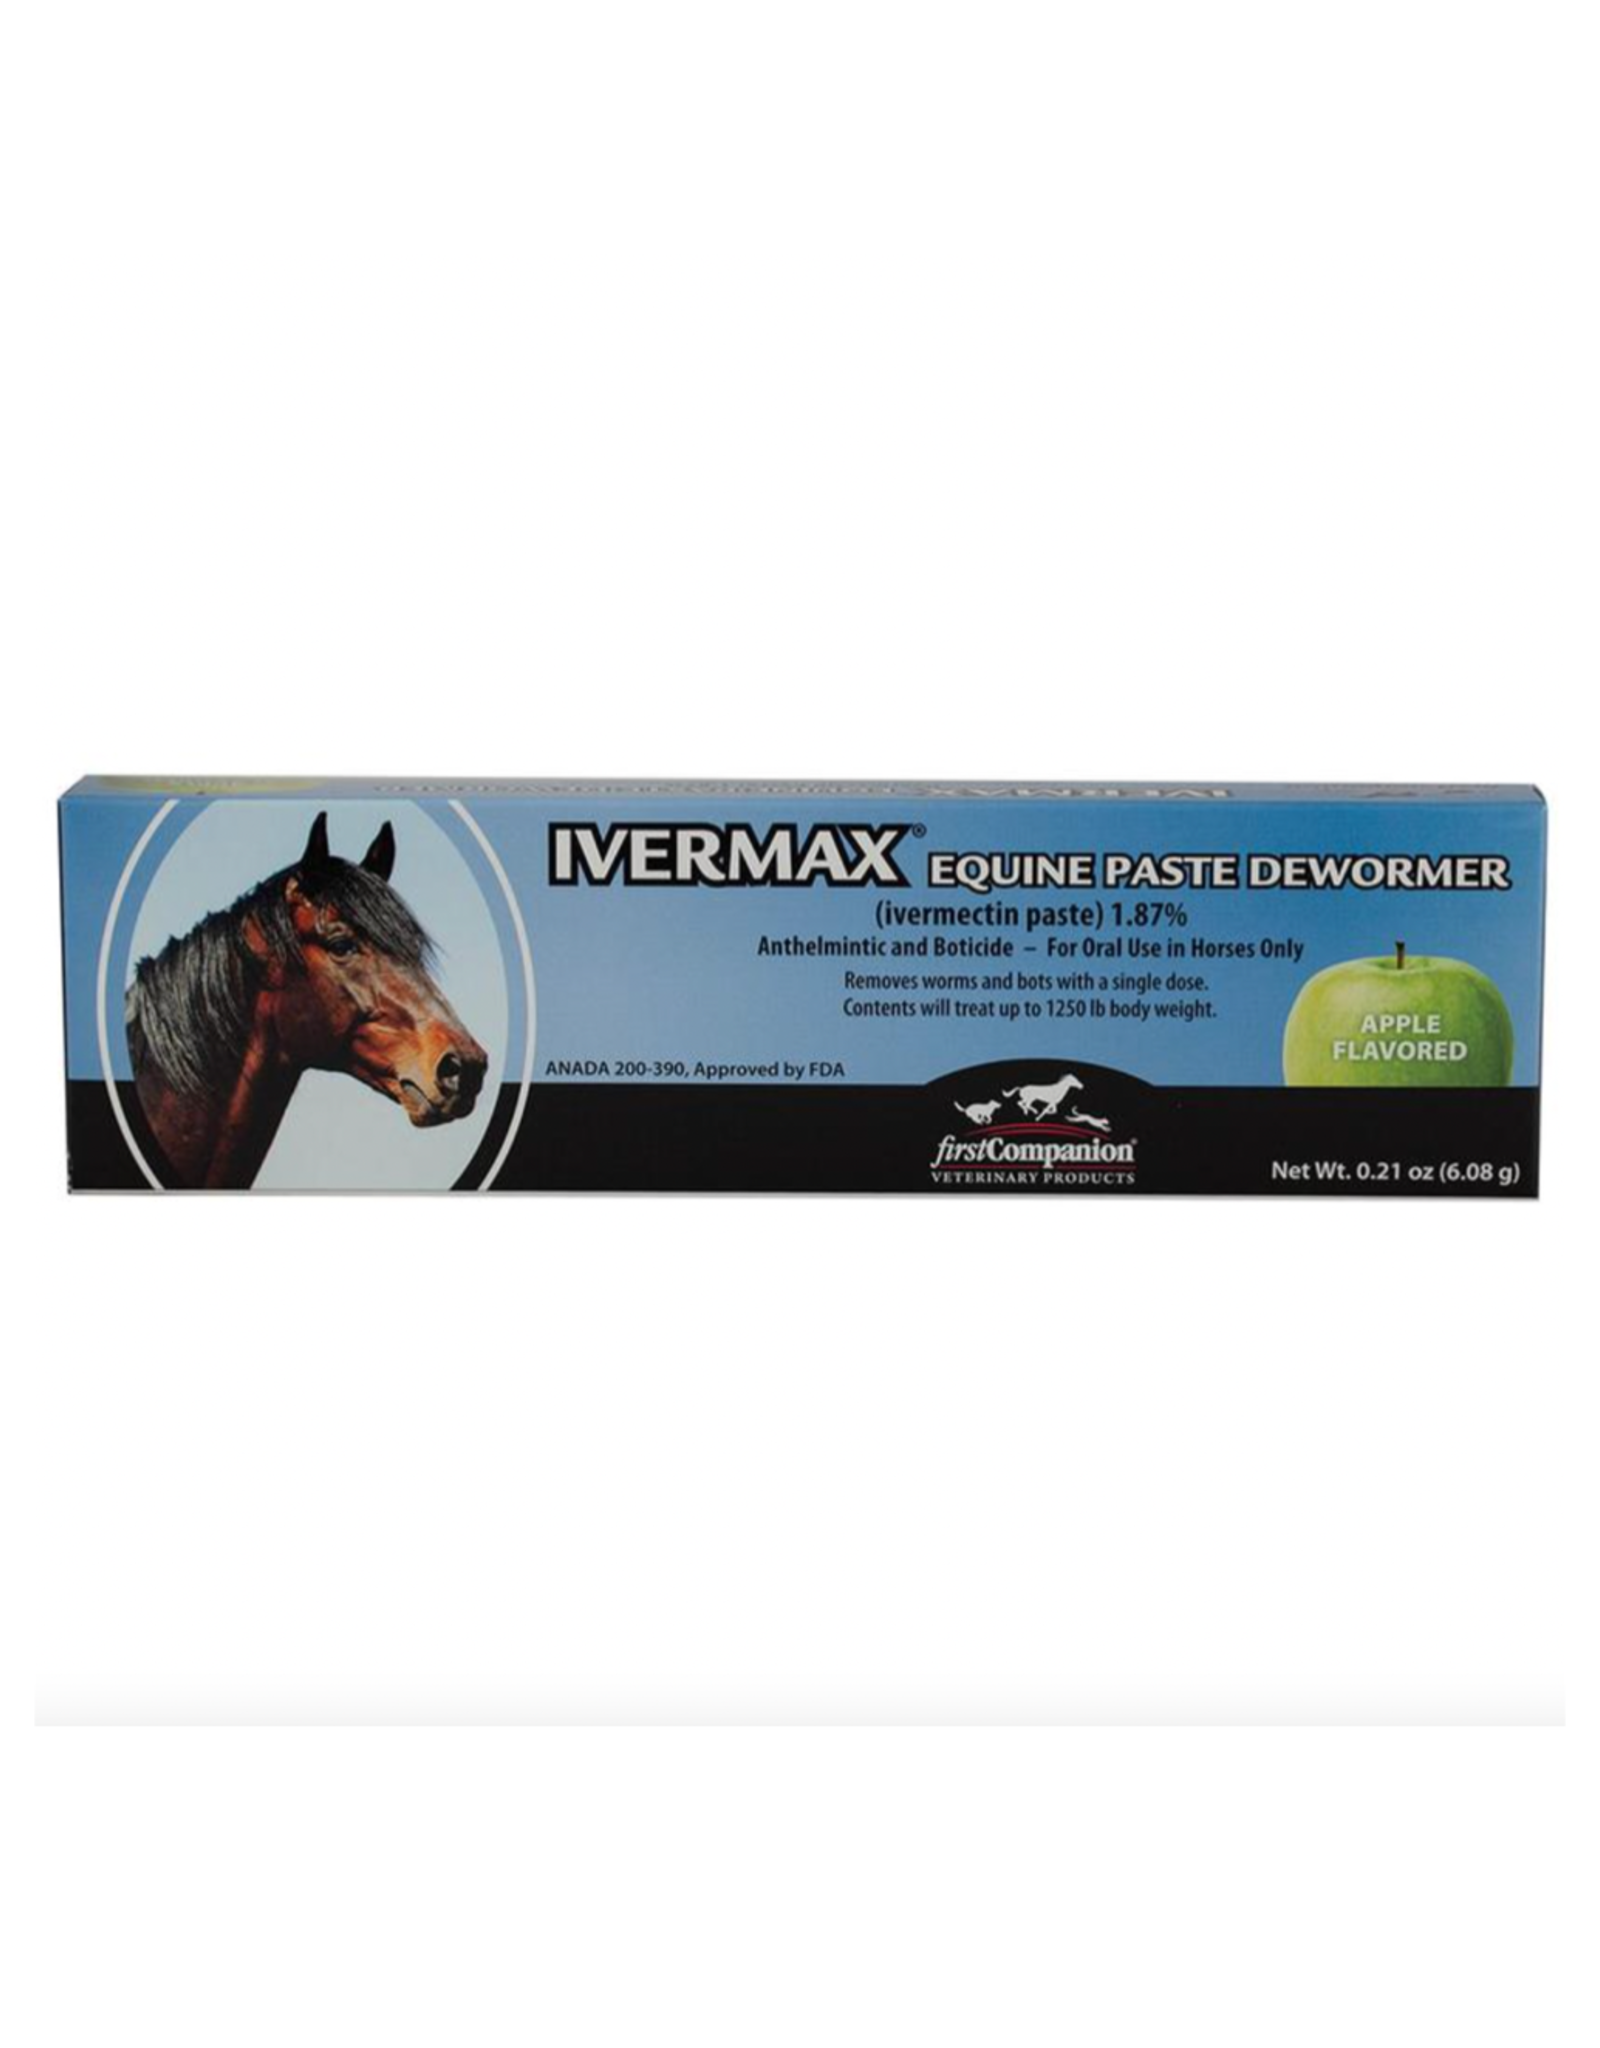 First Companion Ivermax Ivermectin Wormer